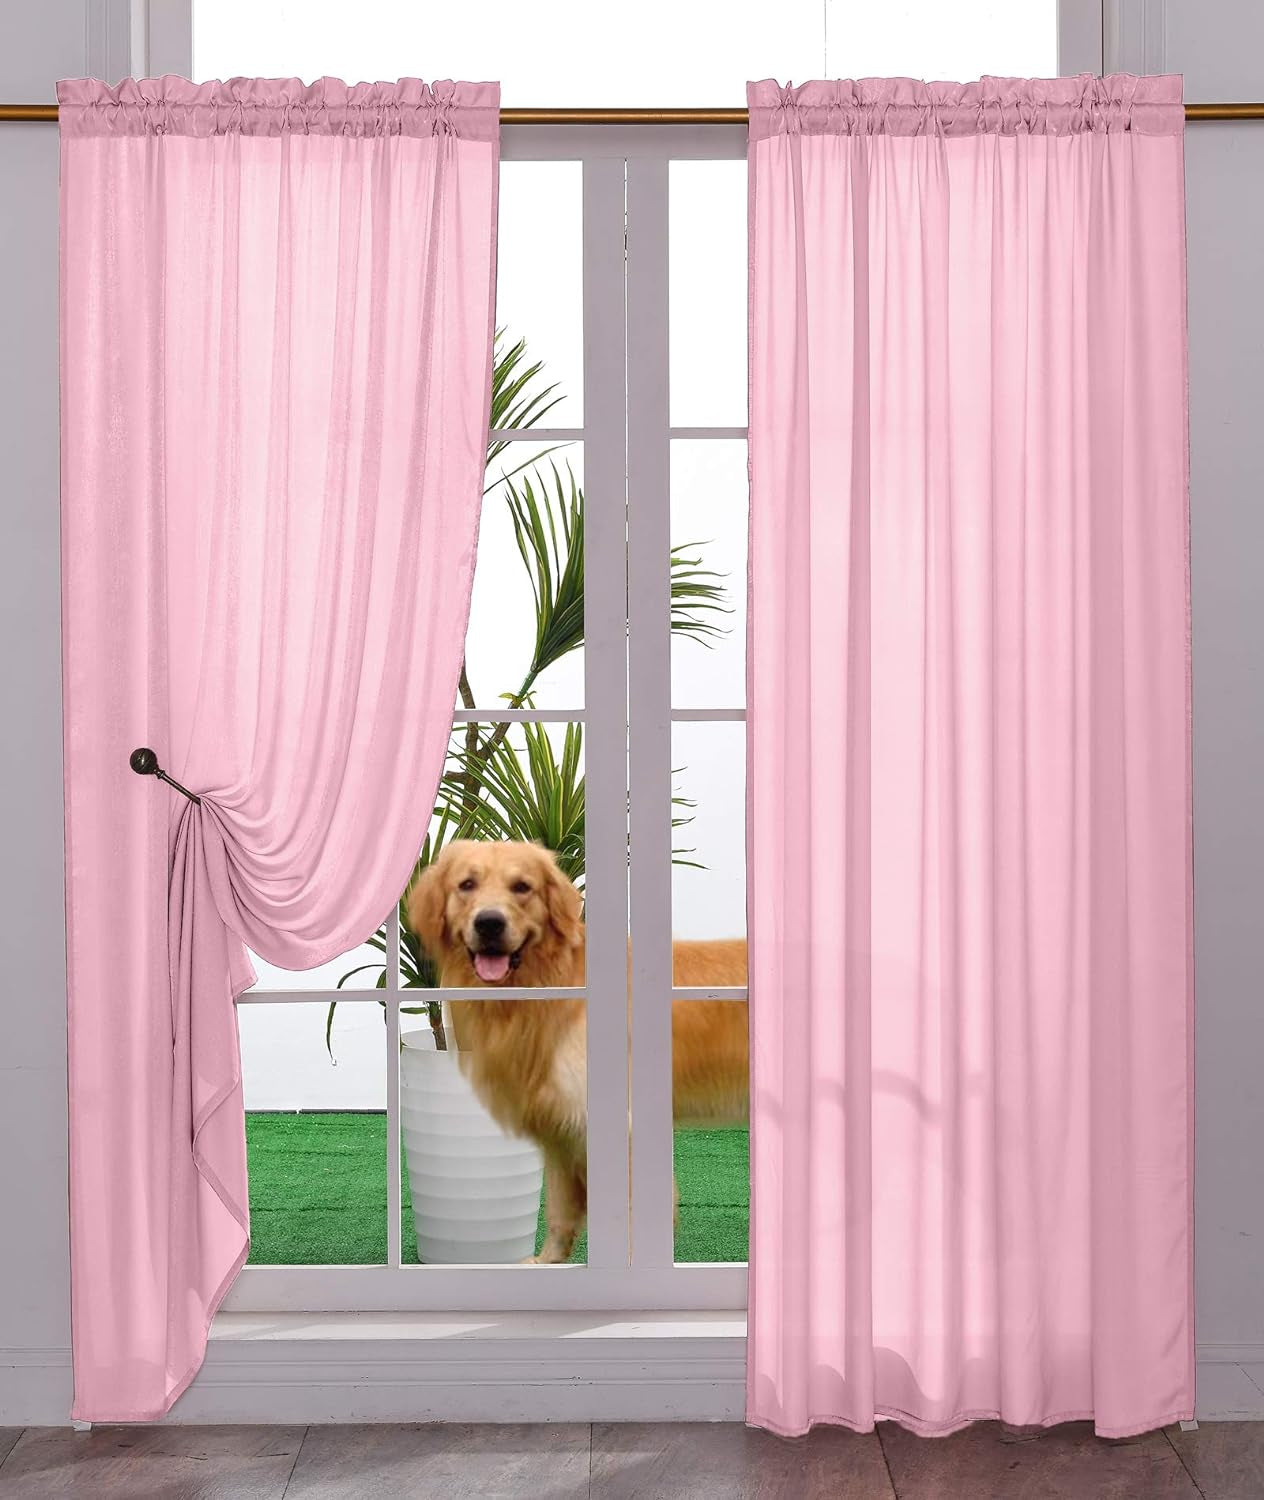 Yancorp Non-See-Through Velvet Opaque Privacy Curtains 2 Panels Drapes for Living Room Bedroom Doorway Divider Semi Sheer Curtain Kithen Window Panels (White, W52 Xl84)  Yancorp Baby Pink W52" X L63" 